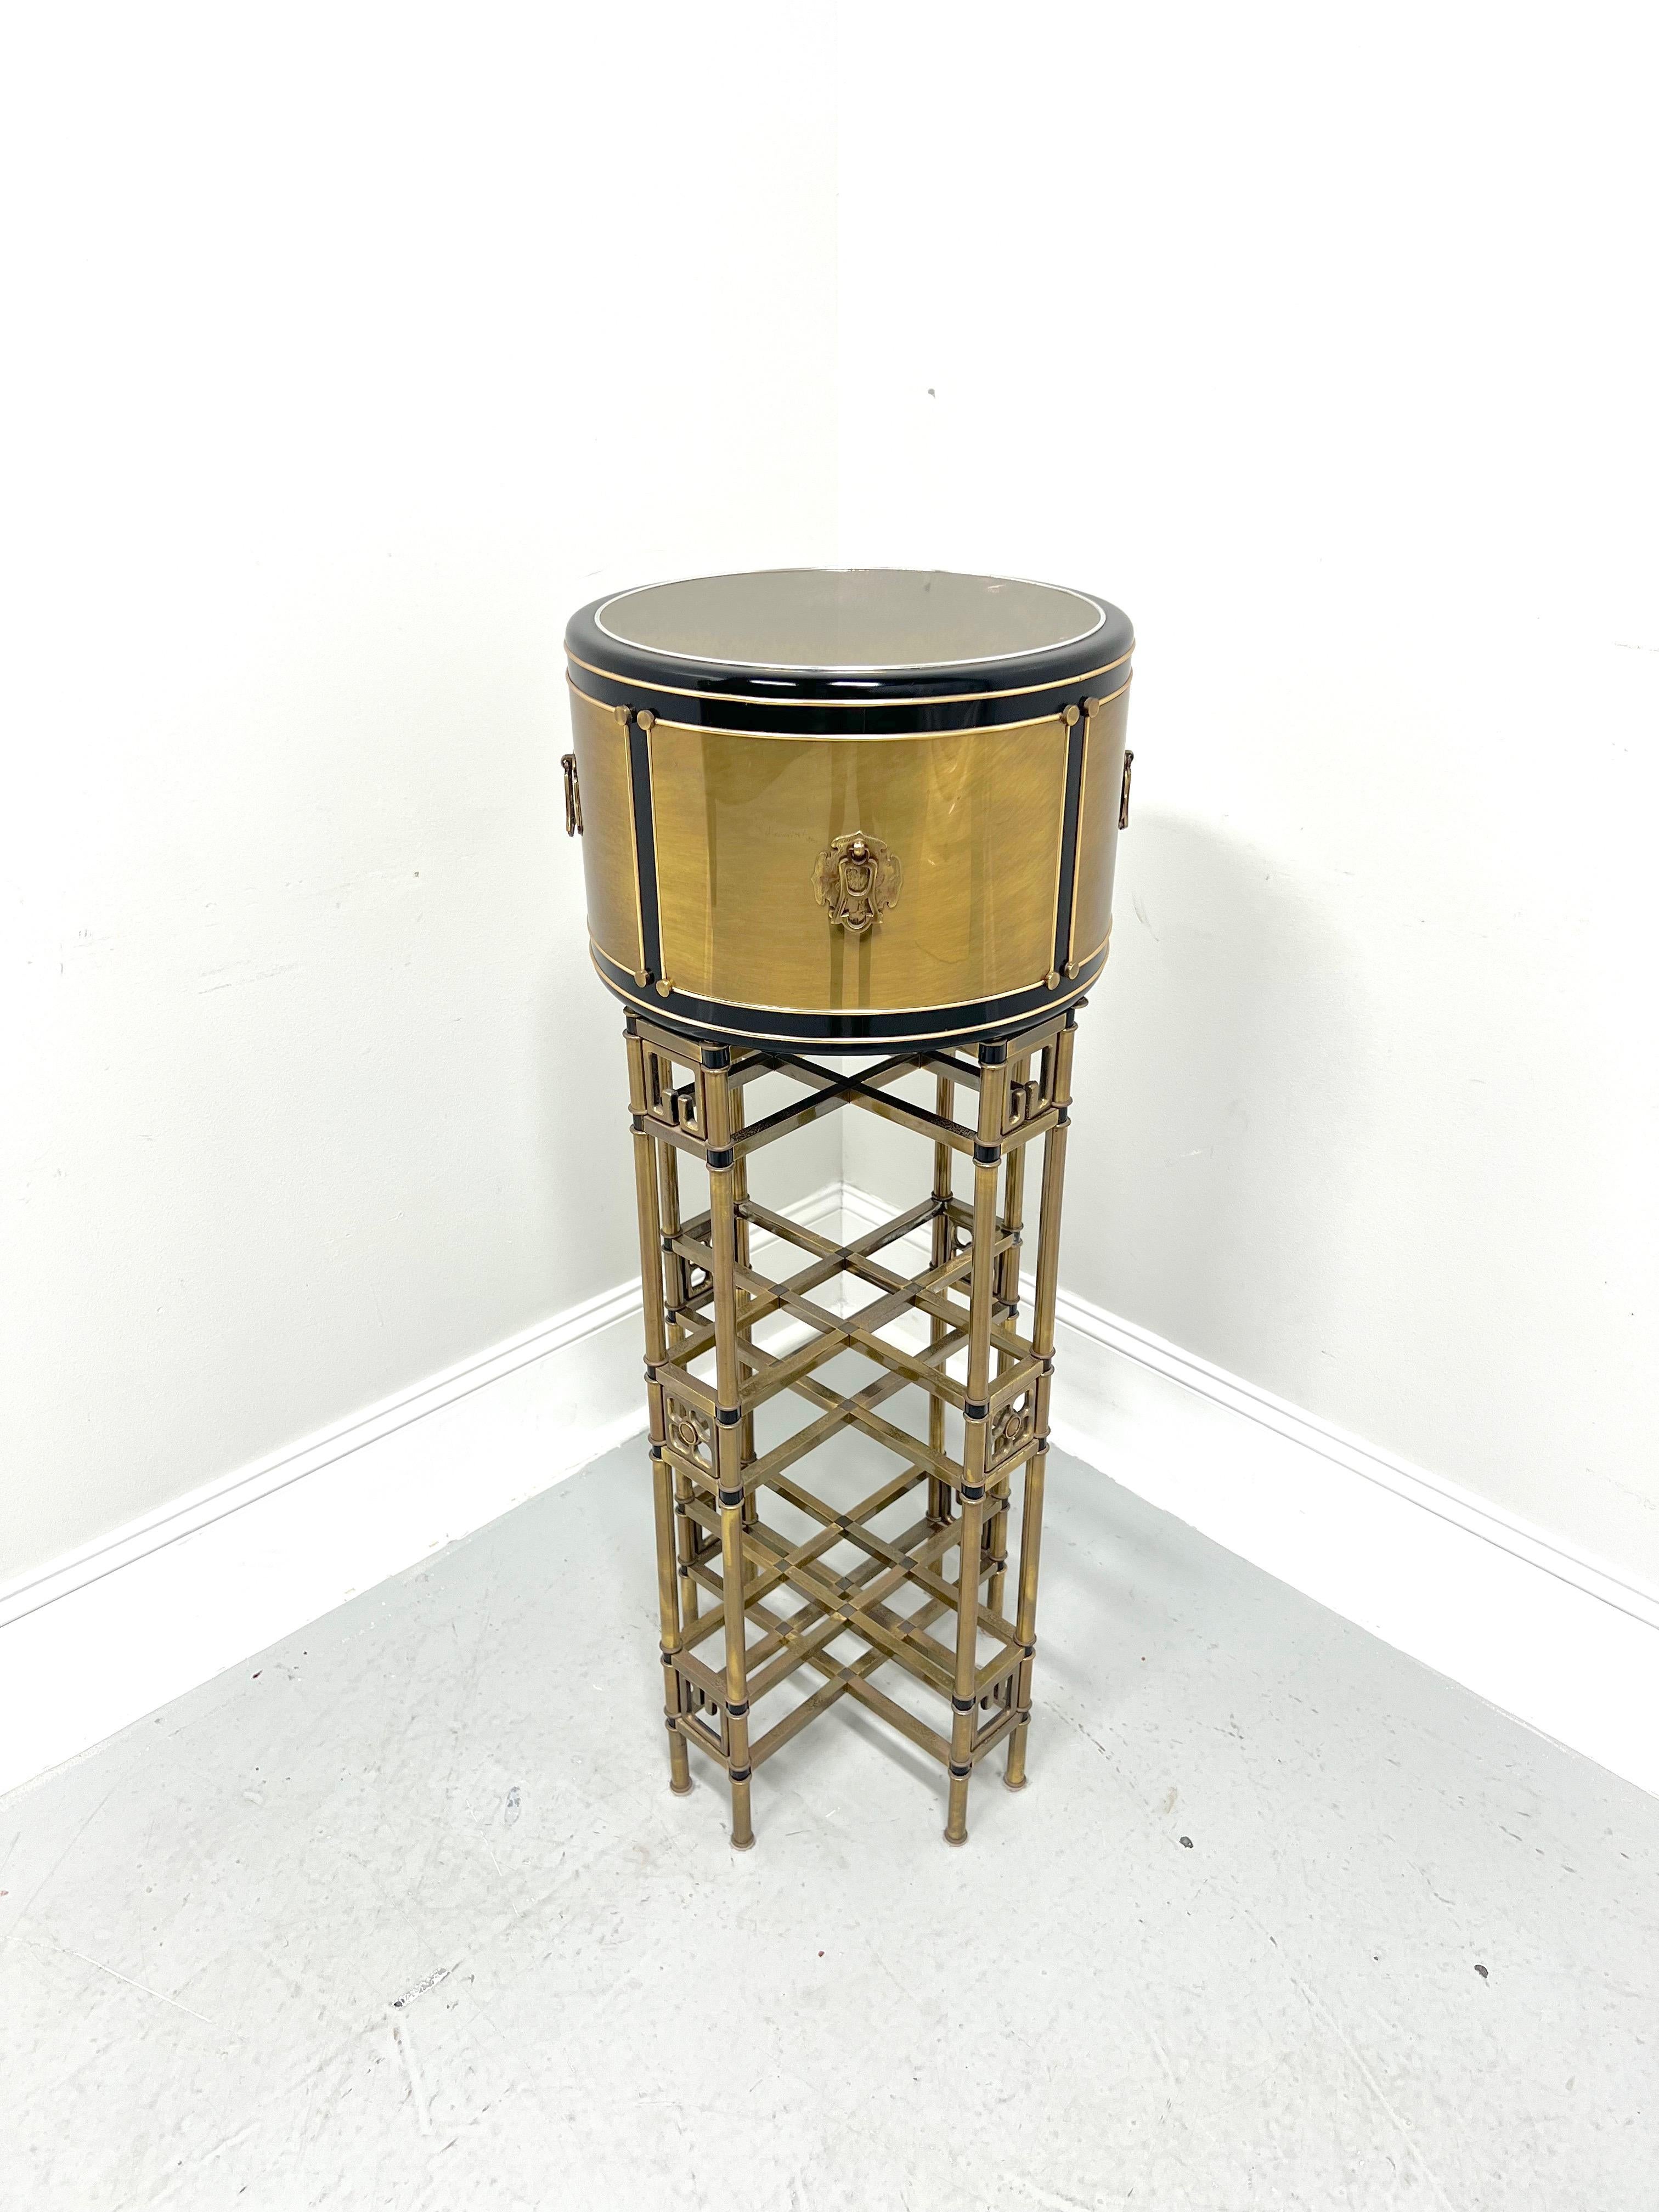 An Asian style plant stand, unbranded. Solid wood core to drum-shaped upper portion with plated brass & black enamel, brass accent hardware, lower portion with bamboo styling in a lattice design with black enamel accents, and cap feet. One piece